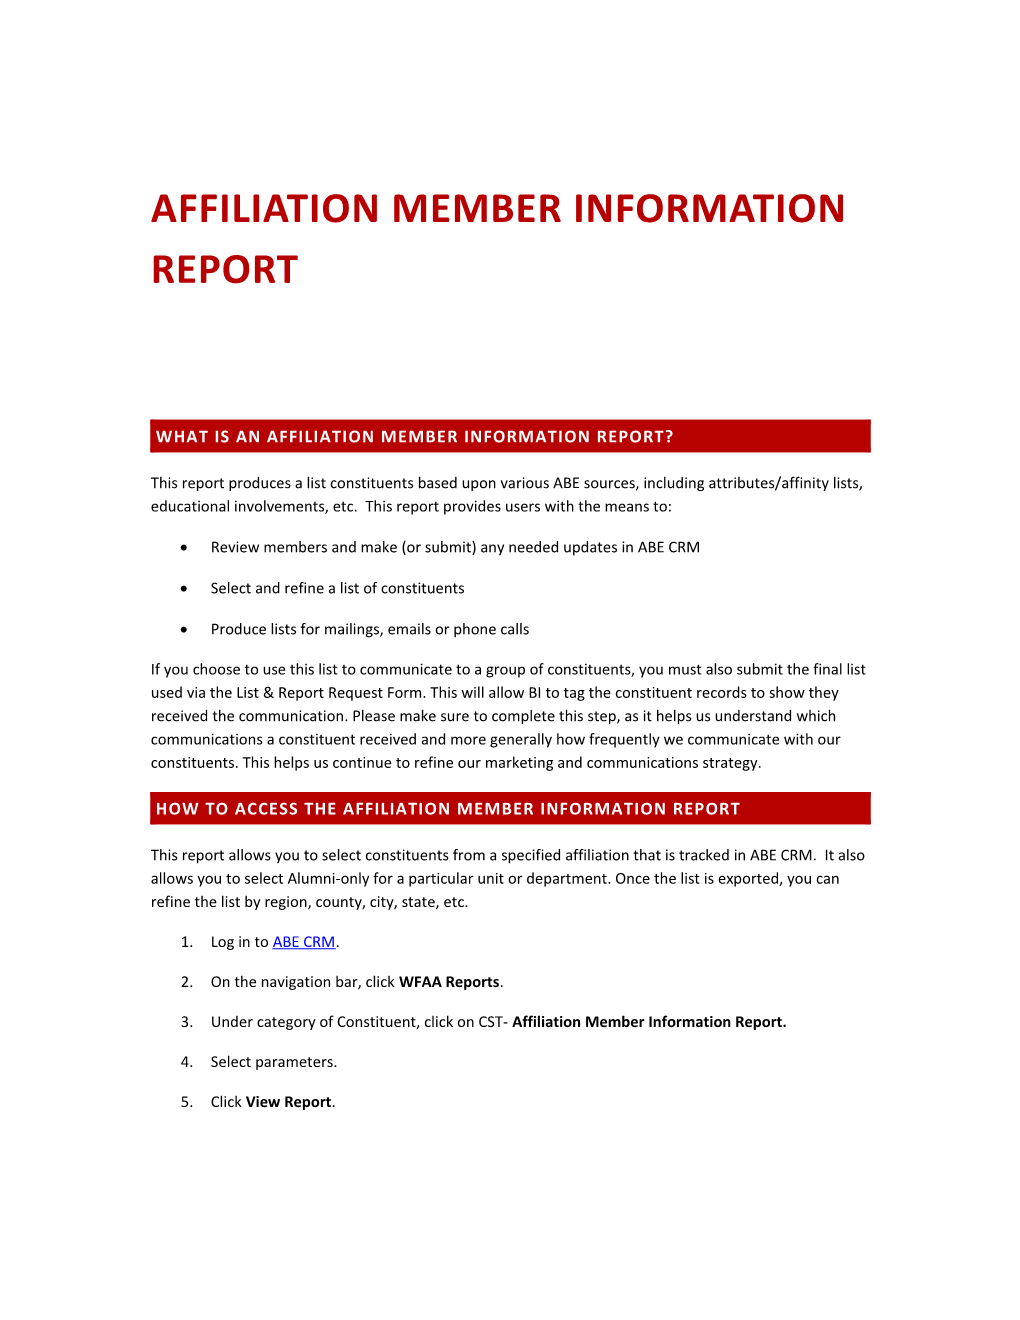 What Is Anaffiliation Member Information Report?